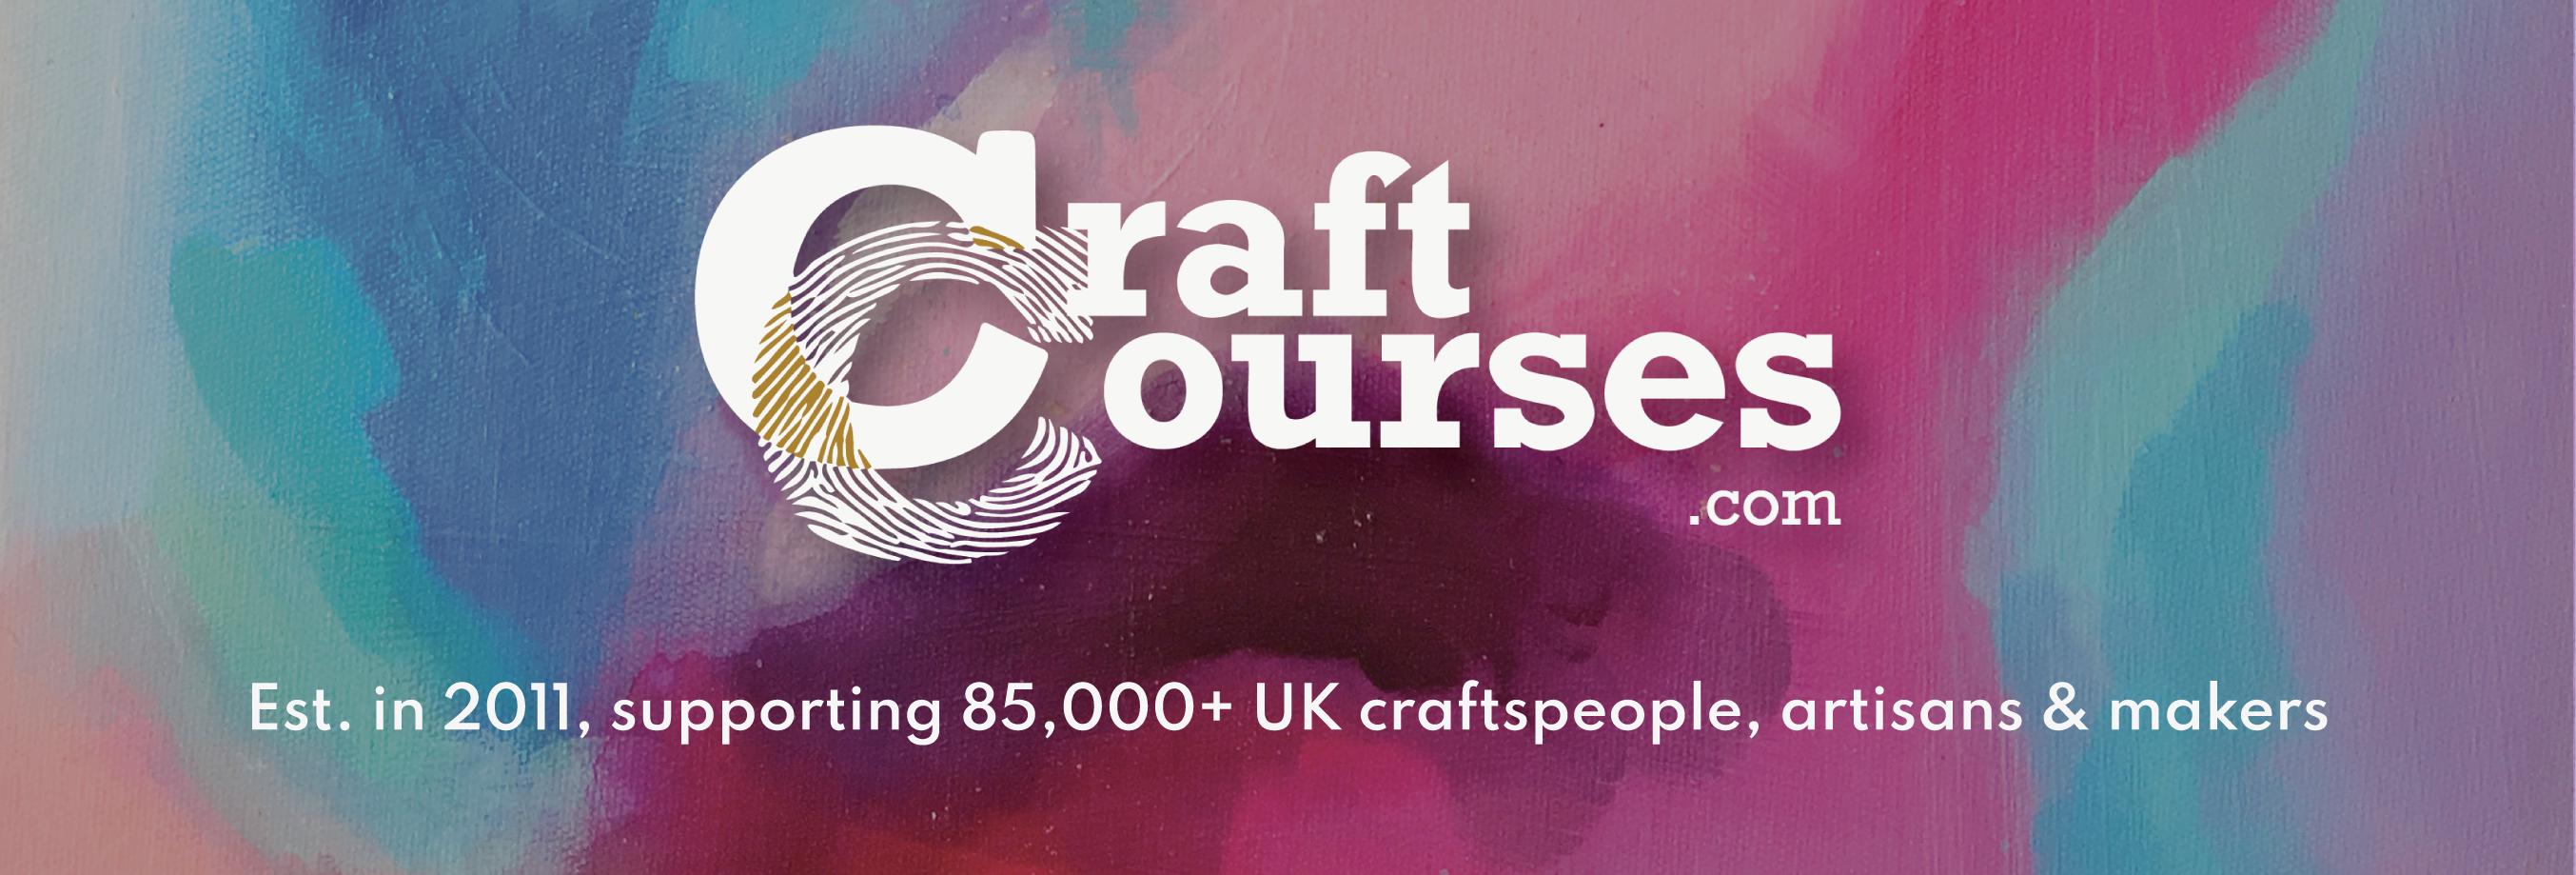 CraftCourses.com, supporting makers all across the UK